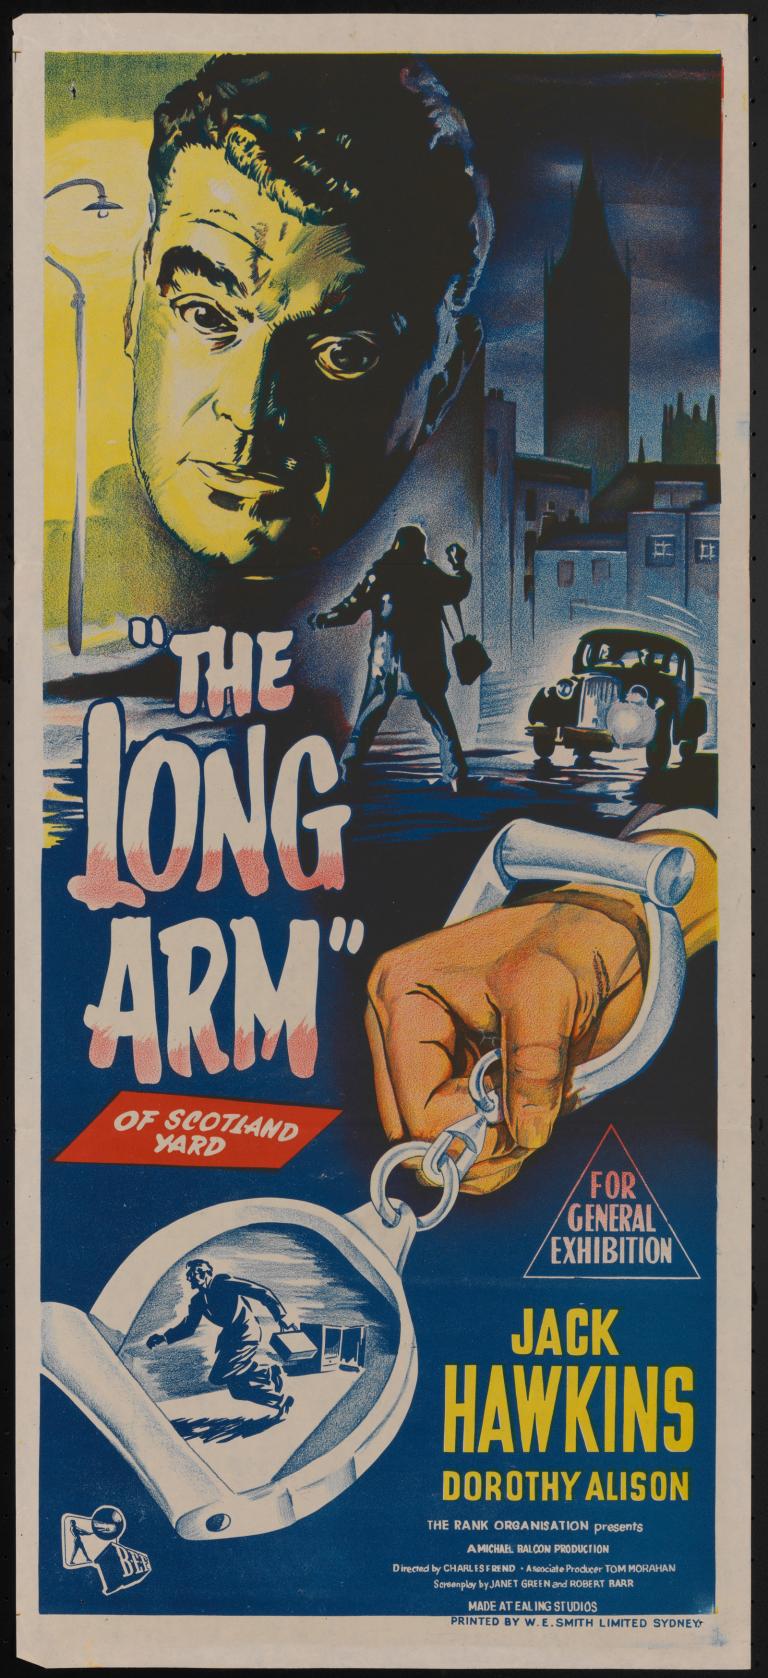 Movie poster for a film titled The Long Arm showing a close up of a hand in handcuffs and a man looking serious.